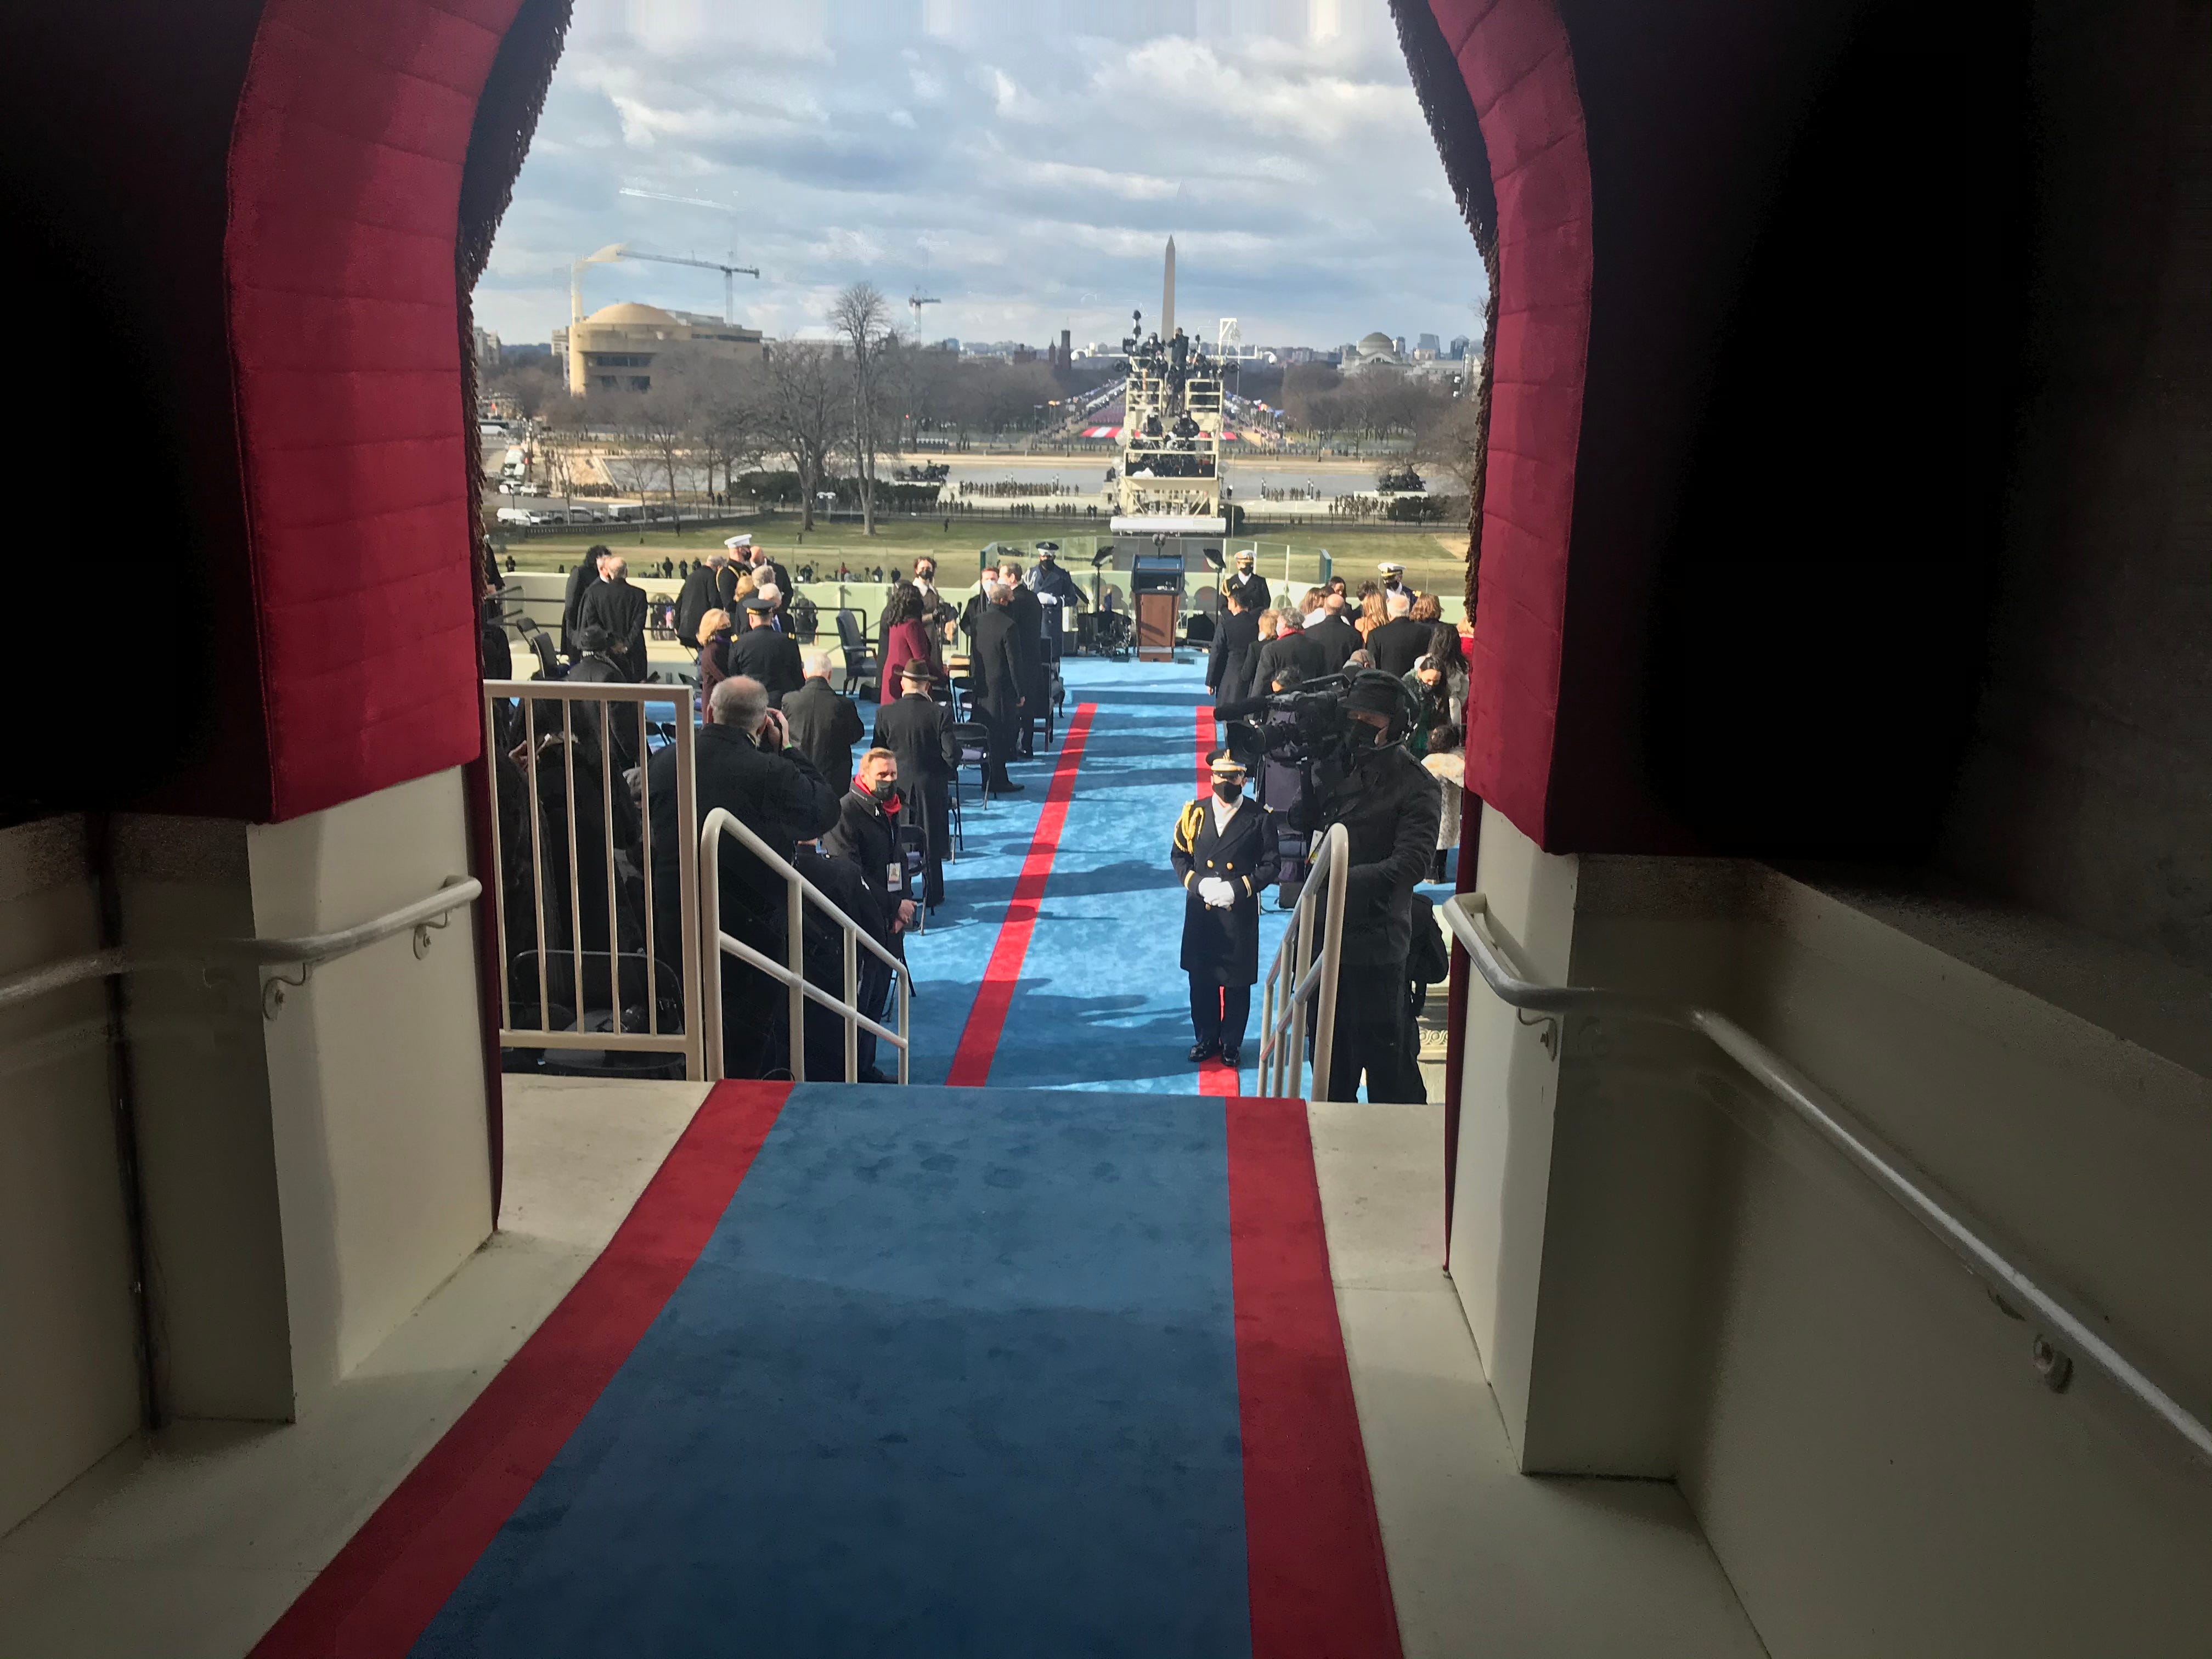 Photos from Senator Coons taken at the 2021 Presidential Inauguration of President Joe Biden and Vice President Kamala Harris at the U.S. Capitol.